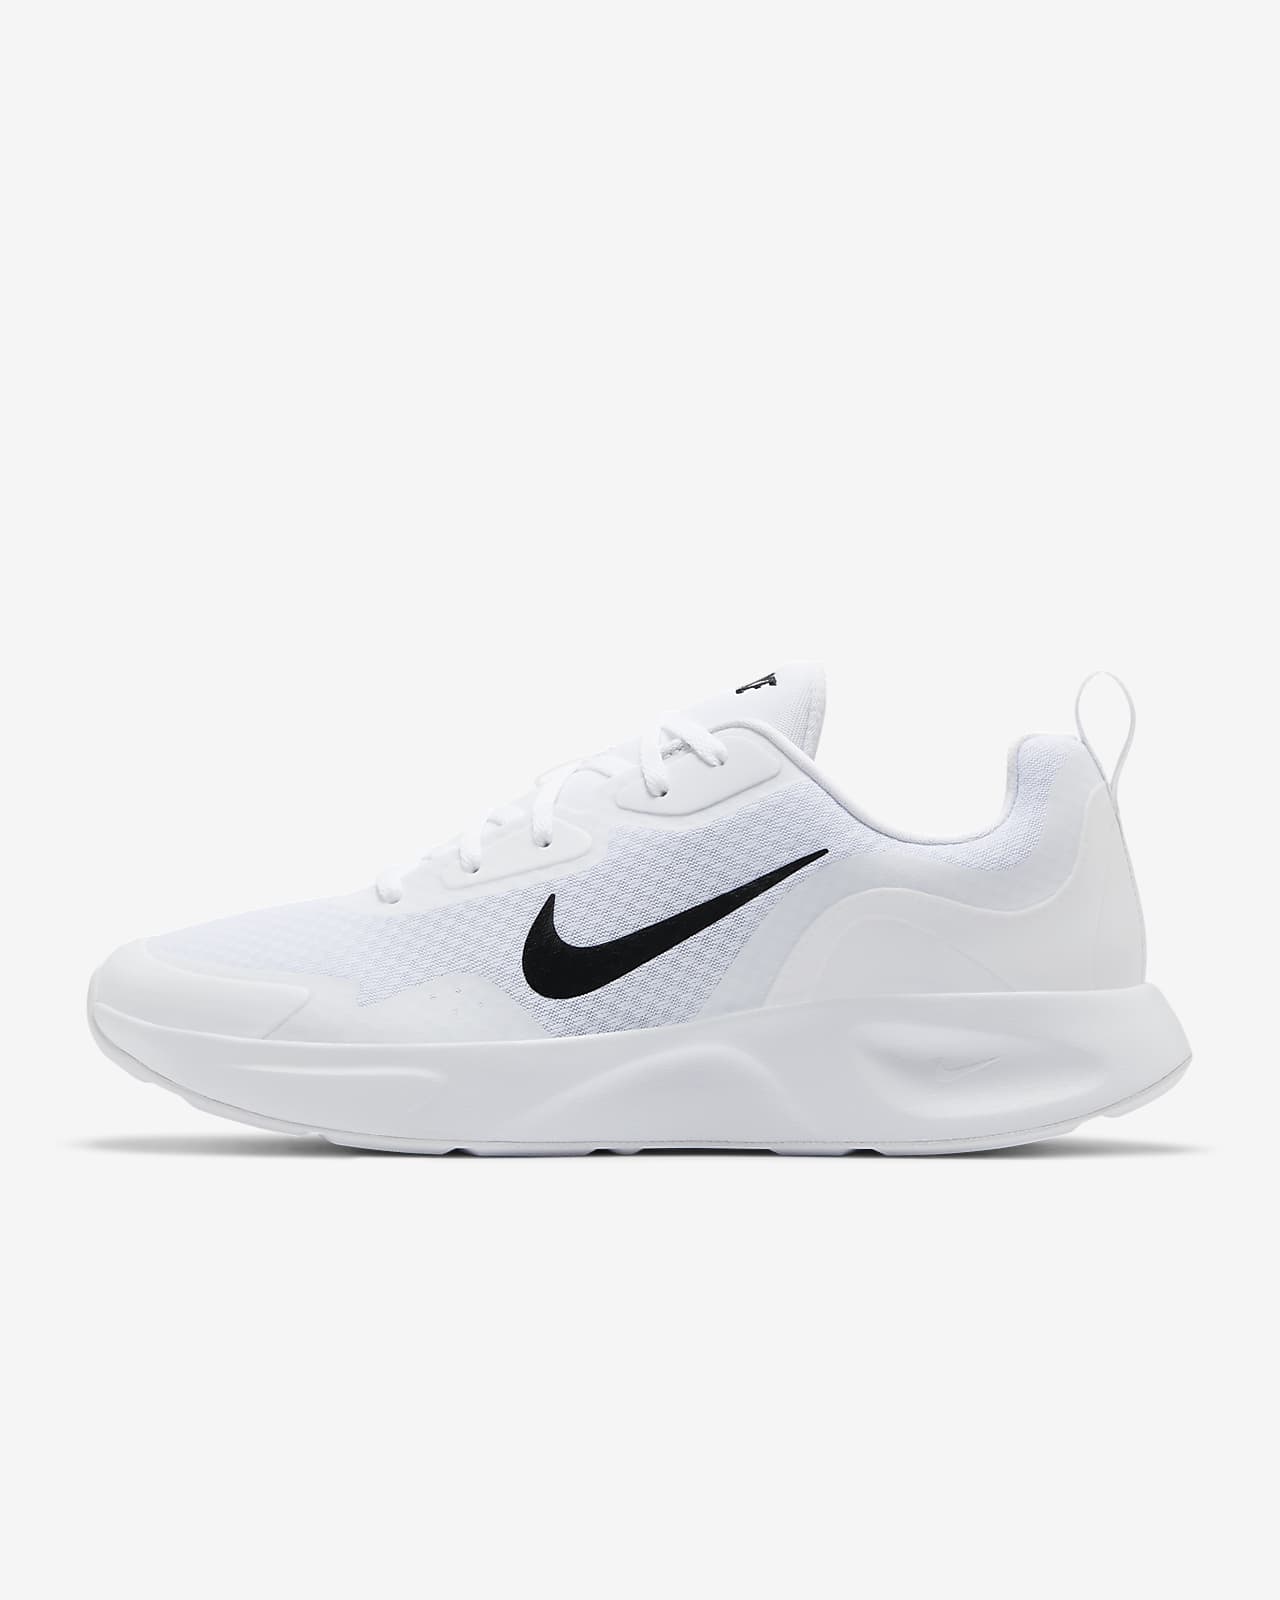 Chaussure Nike Wearallday pour Homme. Nike